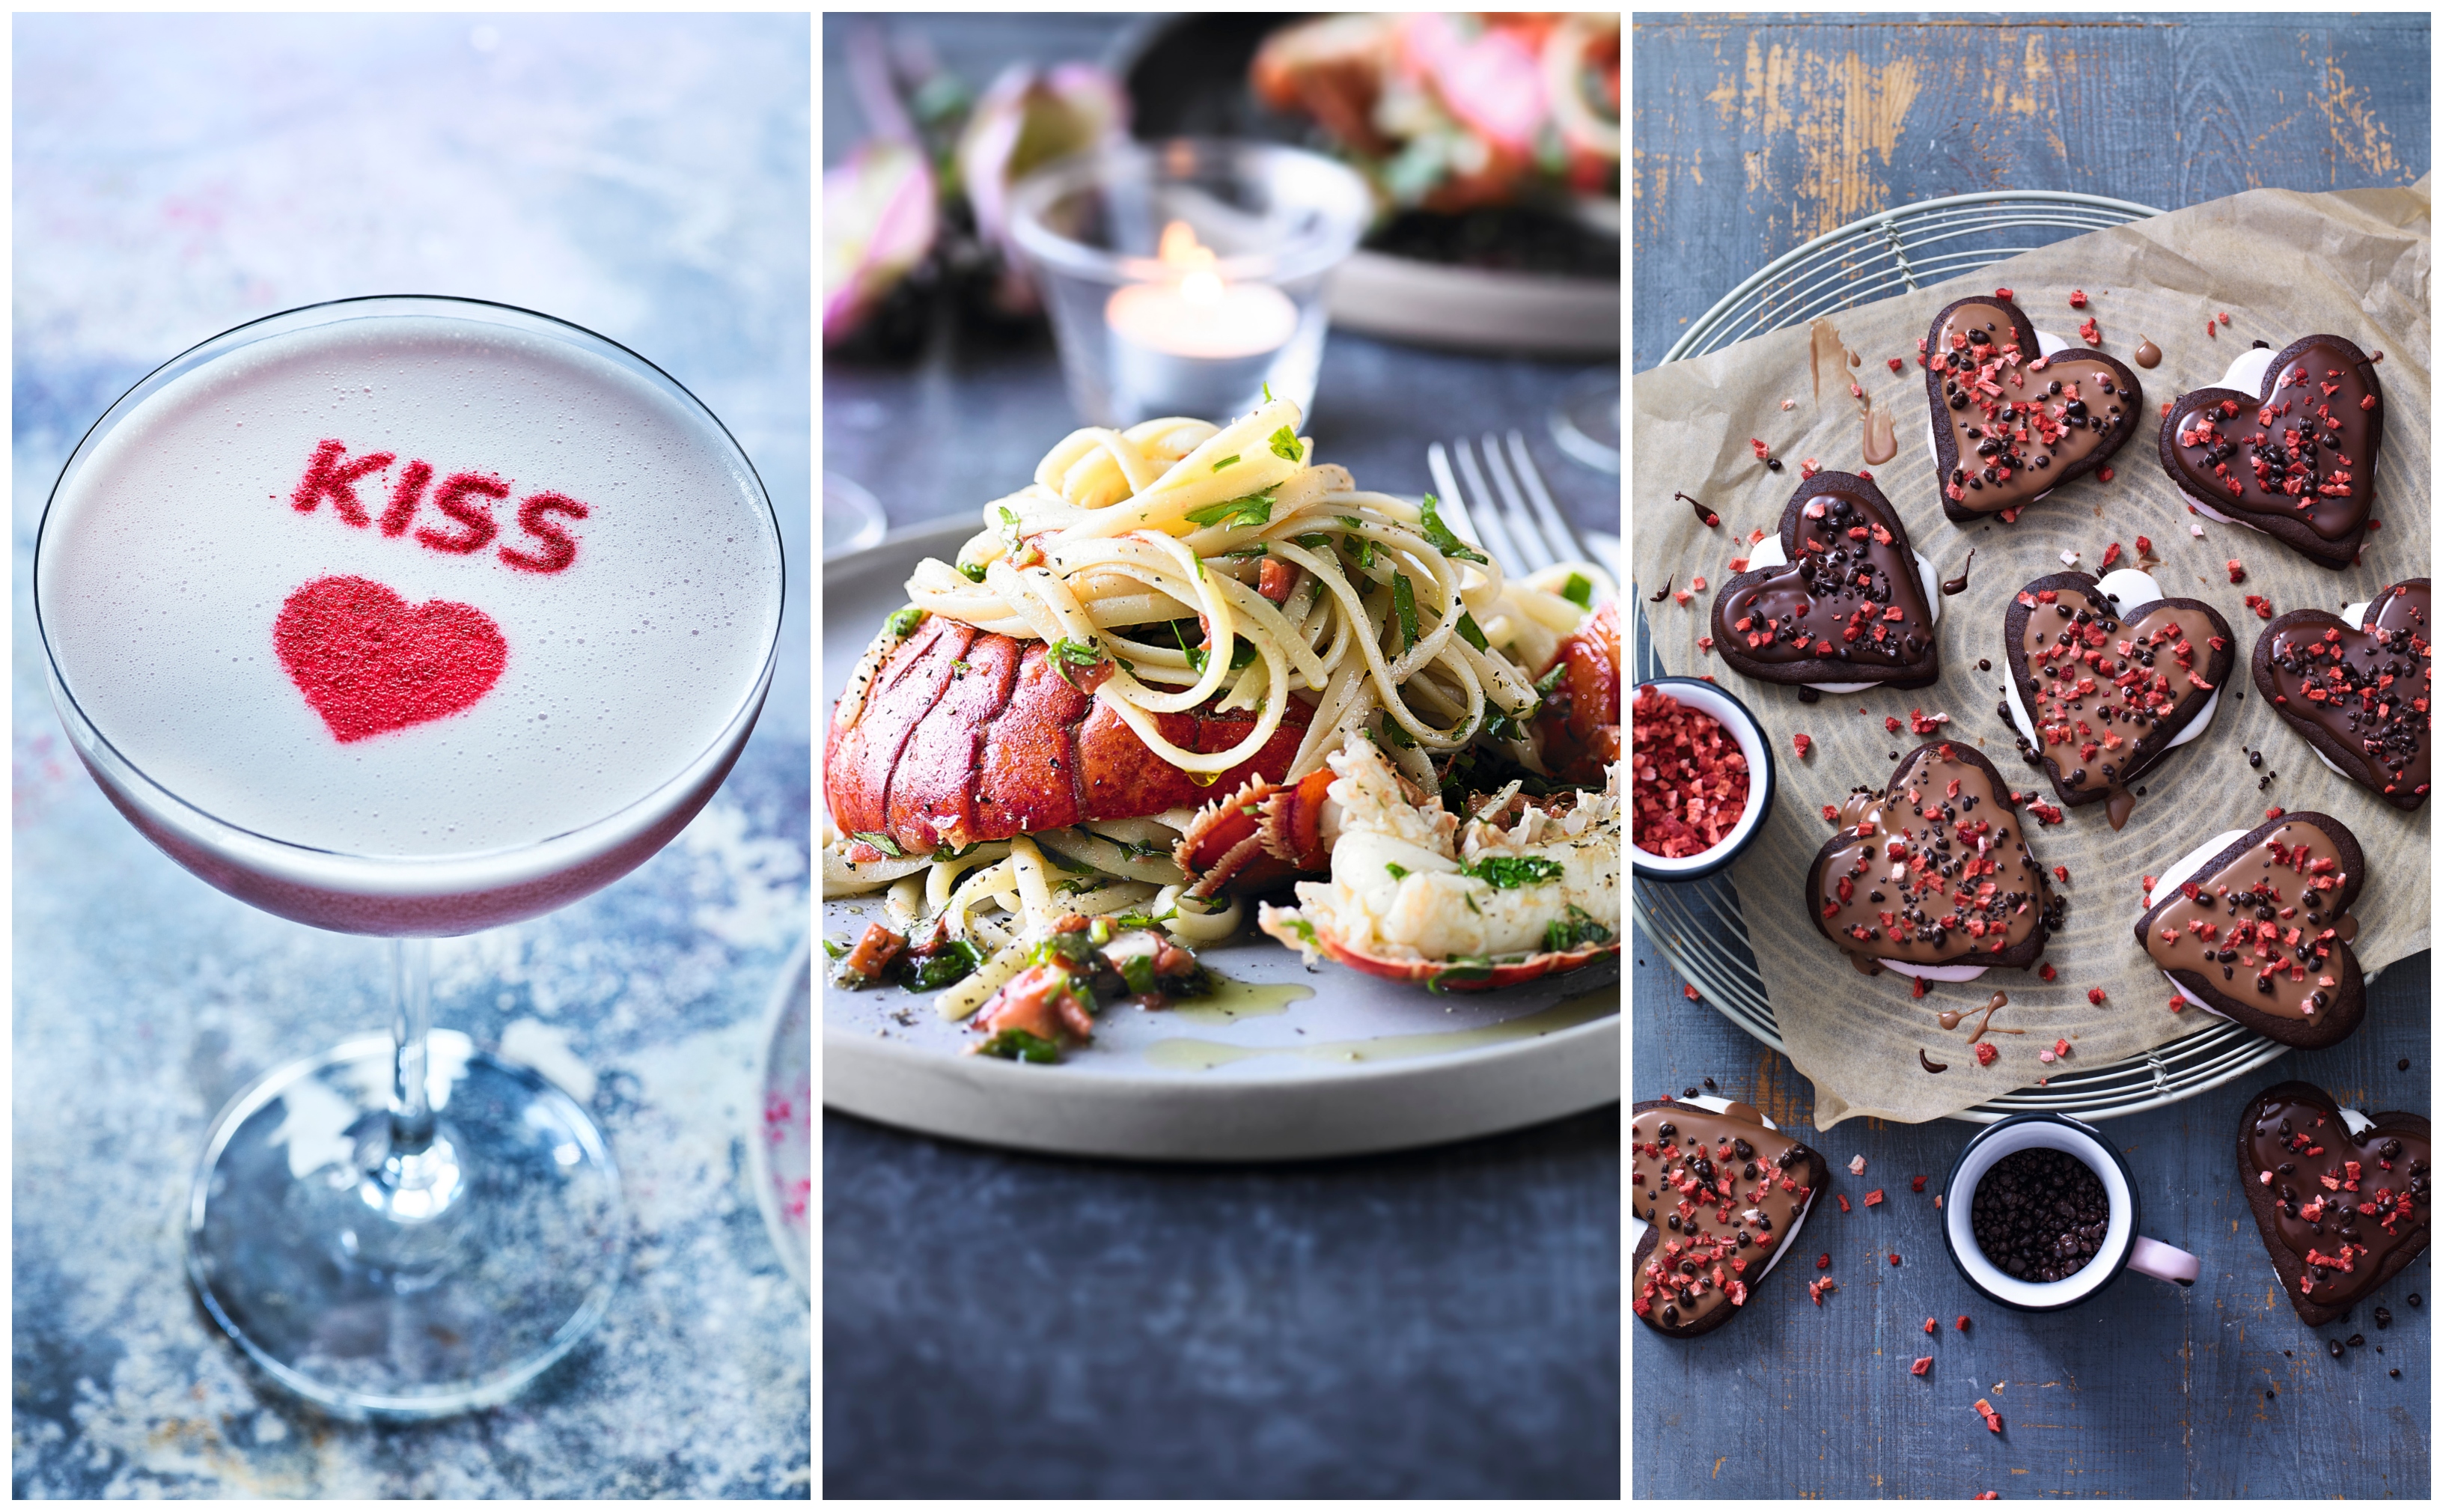 Create The Perfect Valentines Day Meal With These Romantic Recipes The Sunday Post